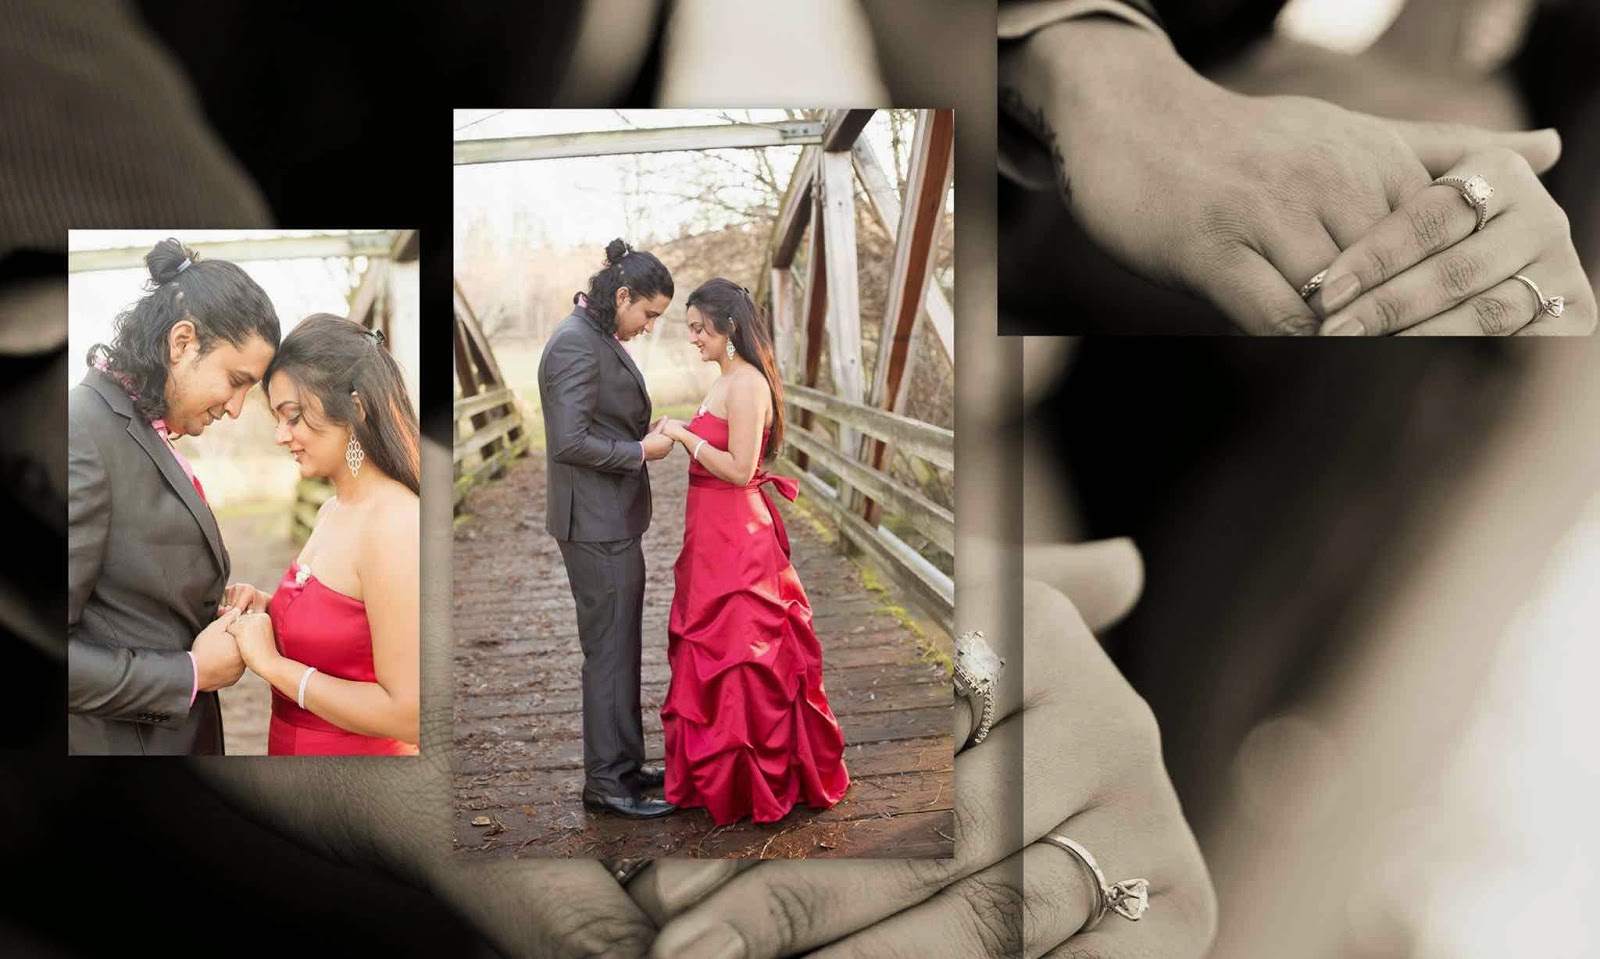 pre wedding shoots, Indian couple in love, Girl in red gown, Couple shoot, Ananya's wedding pictures